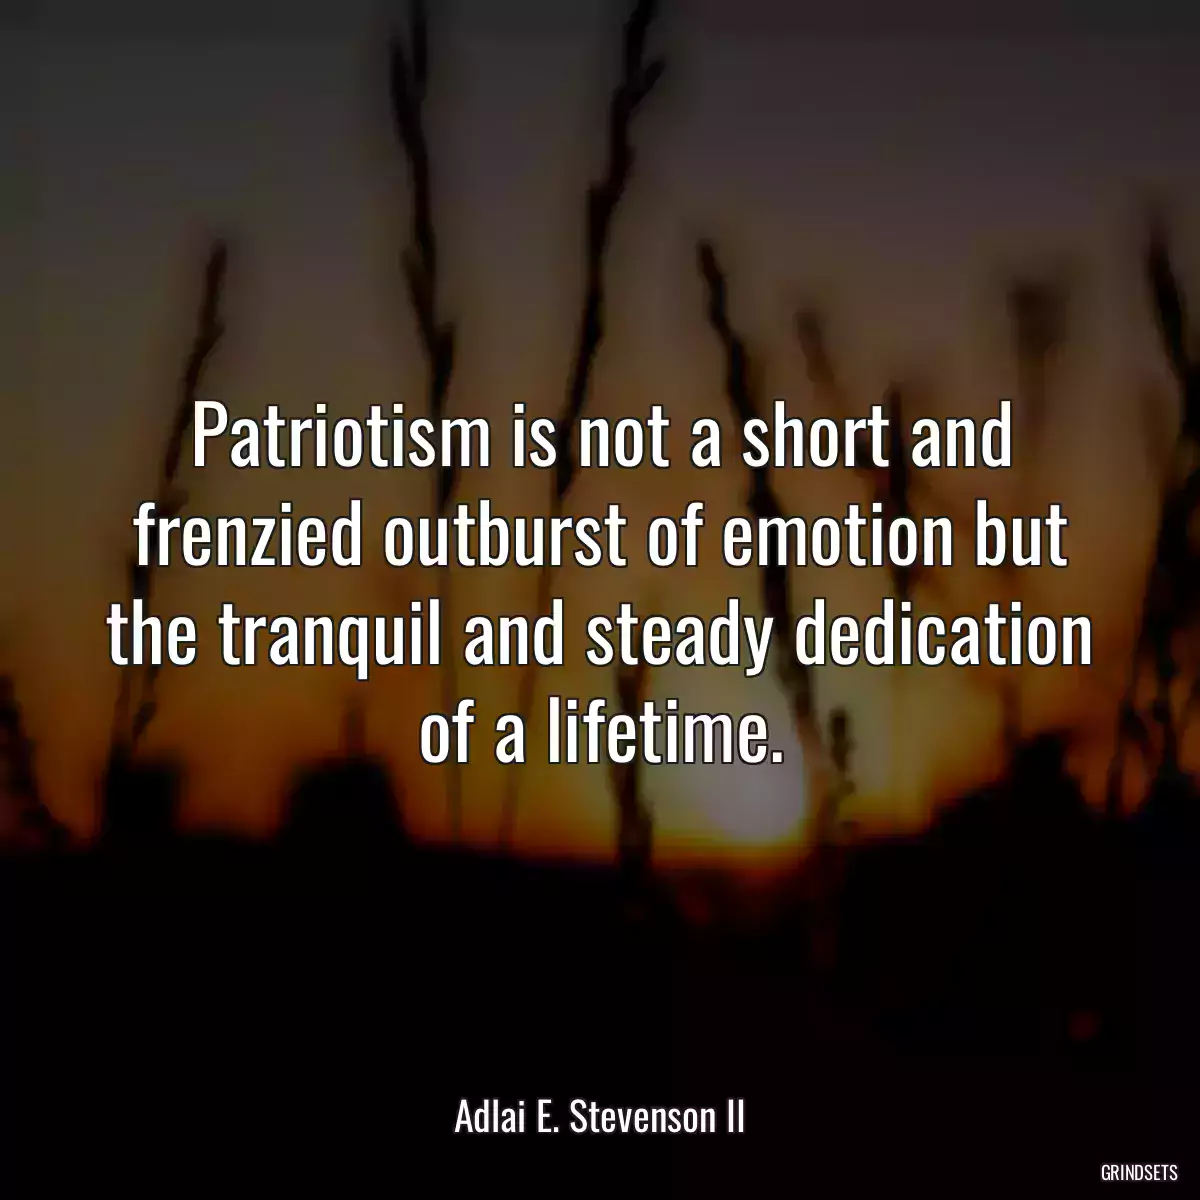 Patriotism is not a short and frenzied outburst of emotion but the tranquil and steady dedication of a lifetime.